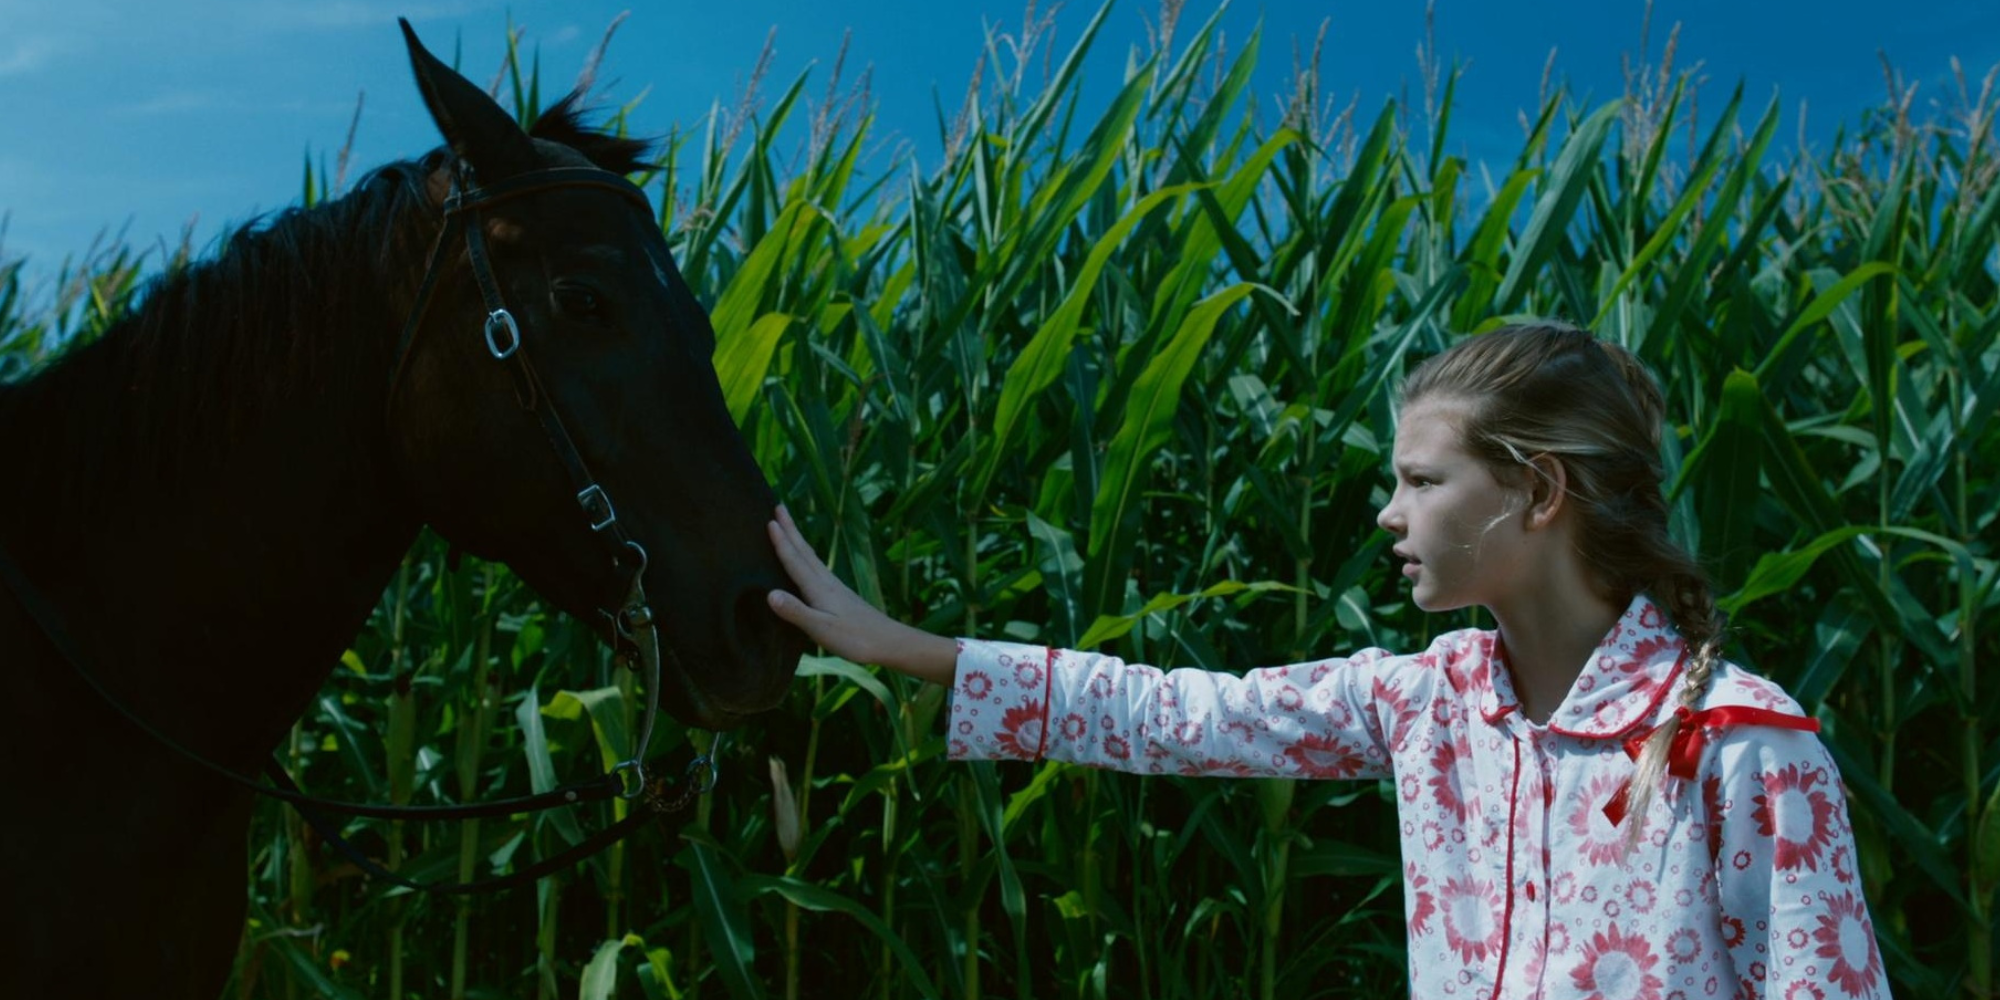 A young girl touches a black horse's nose